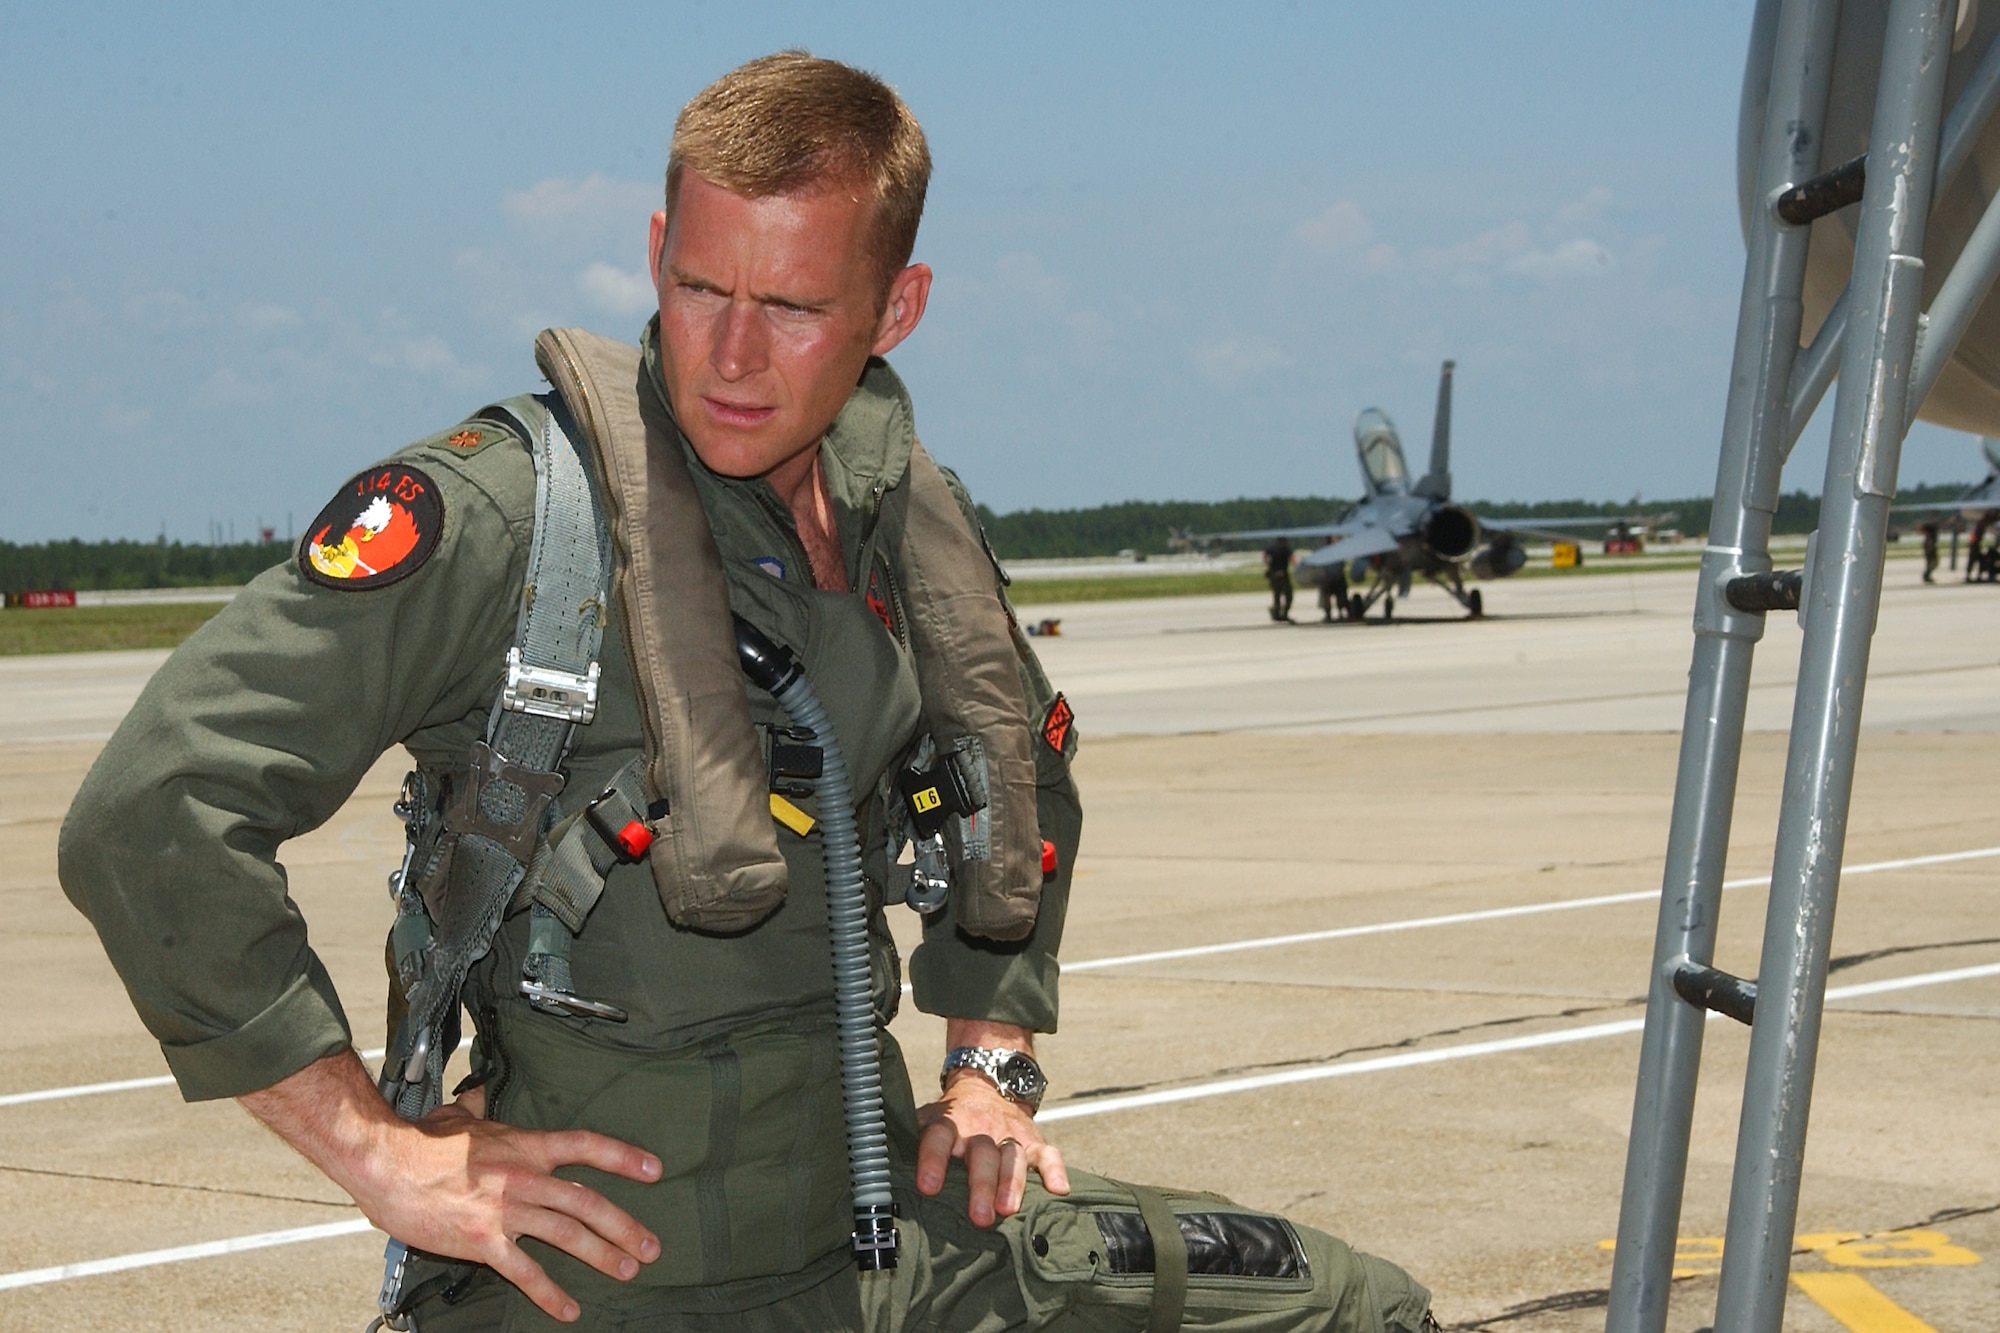 Maj. Richard Wedan, 173rd Fighter Wing, pauses next to his aircraft, June 11, 2003 at Kingsley Field in Klamath Falls, Ore. Wedan spent nearly 15 years as an instructor pilot with the Oregon Air National Guard. (photo courtesy of Richard Wedan)